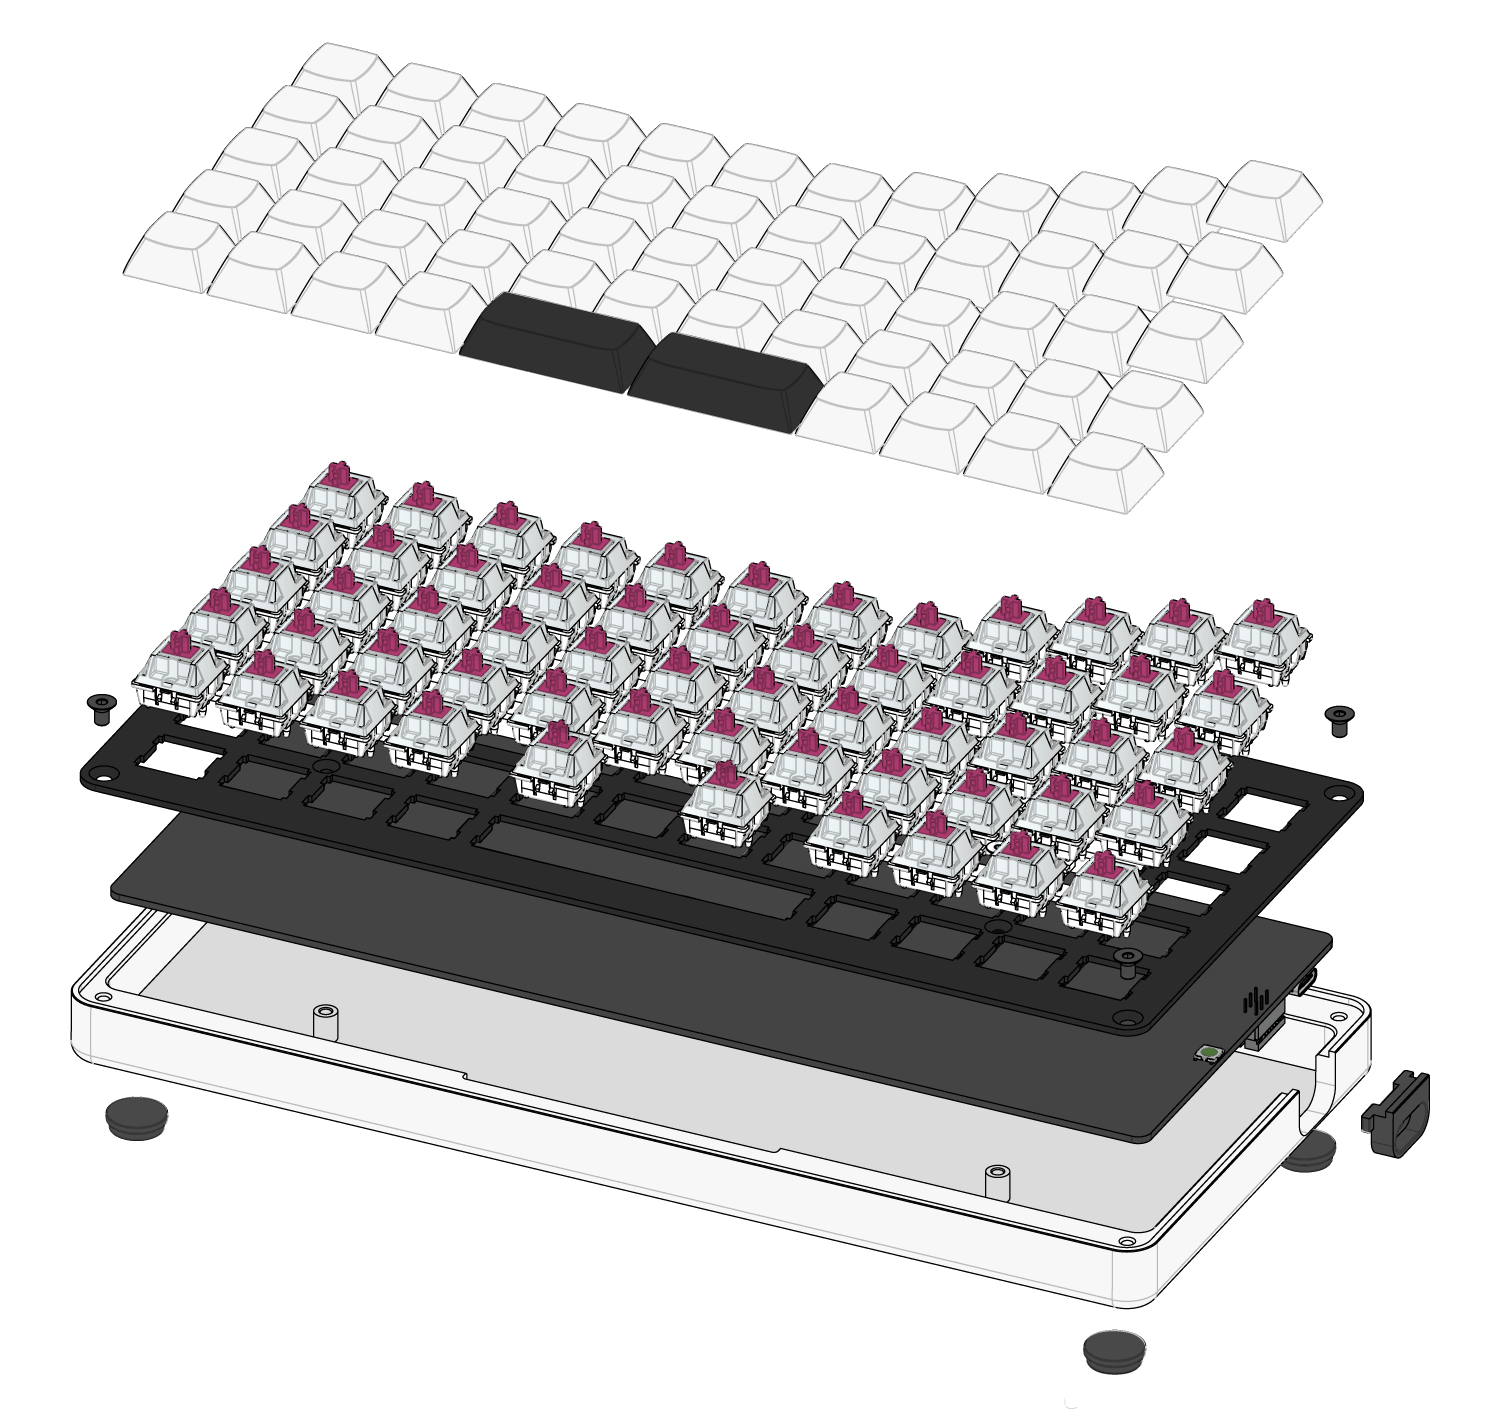 GK6 exploded view